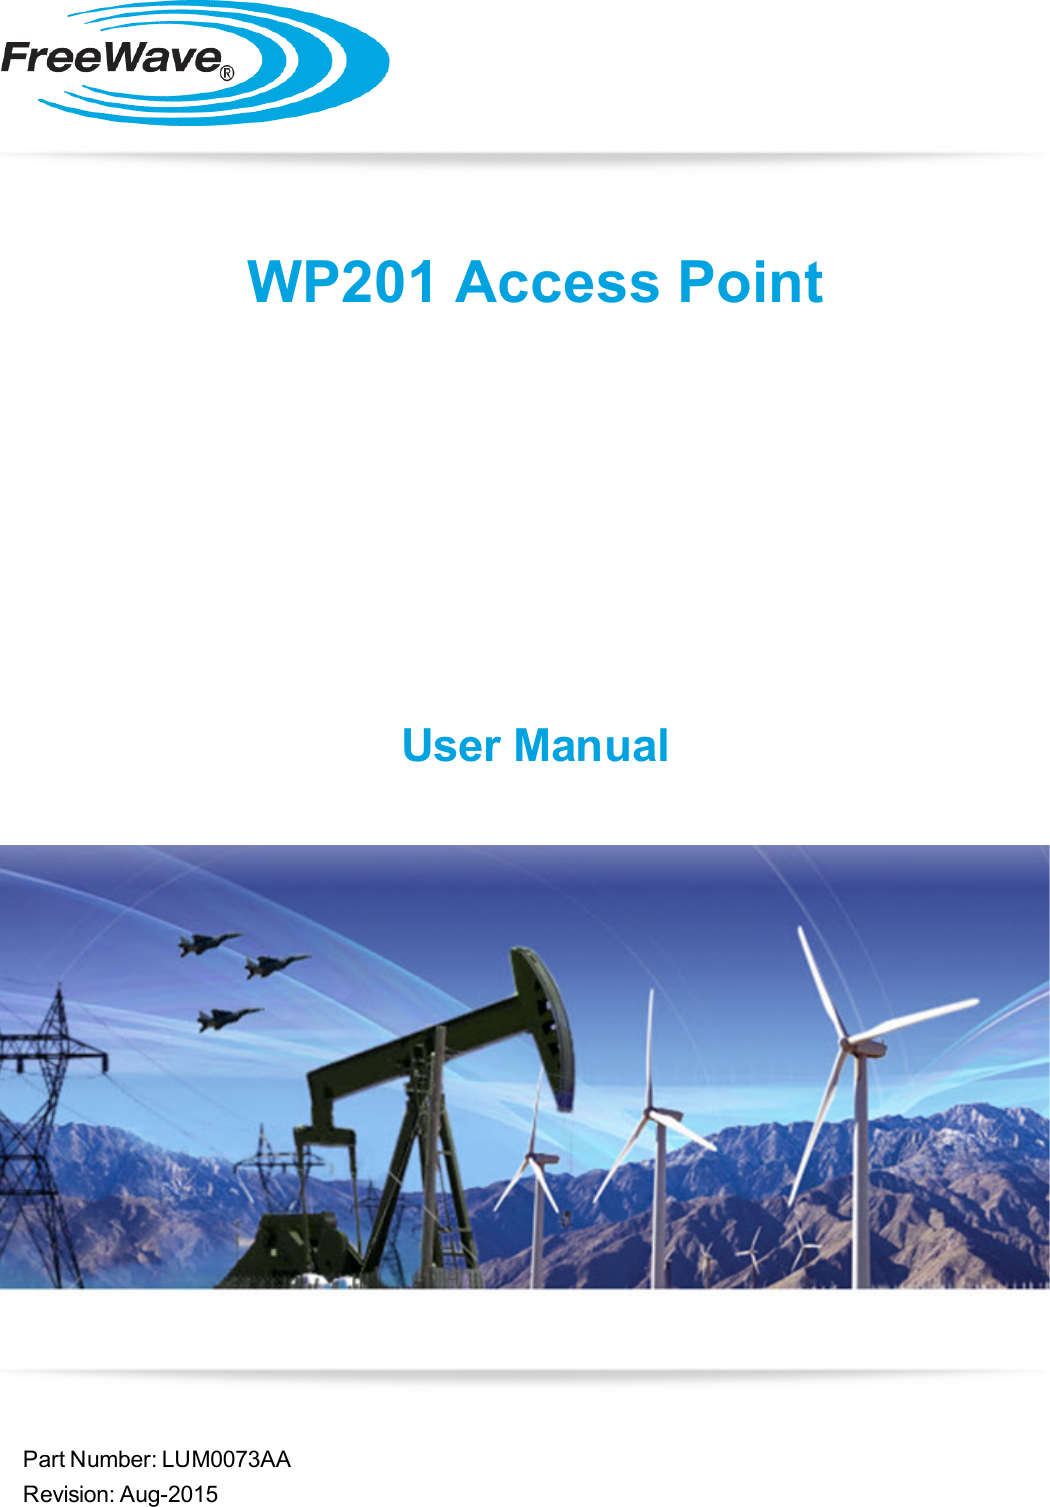 Part Number: LUM0073AARevision: Aug-2015WP201 Access PointUser Manual